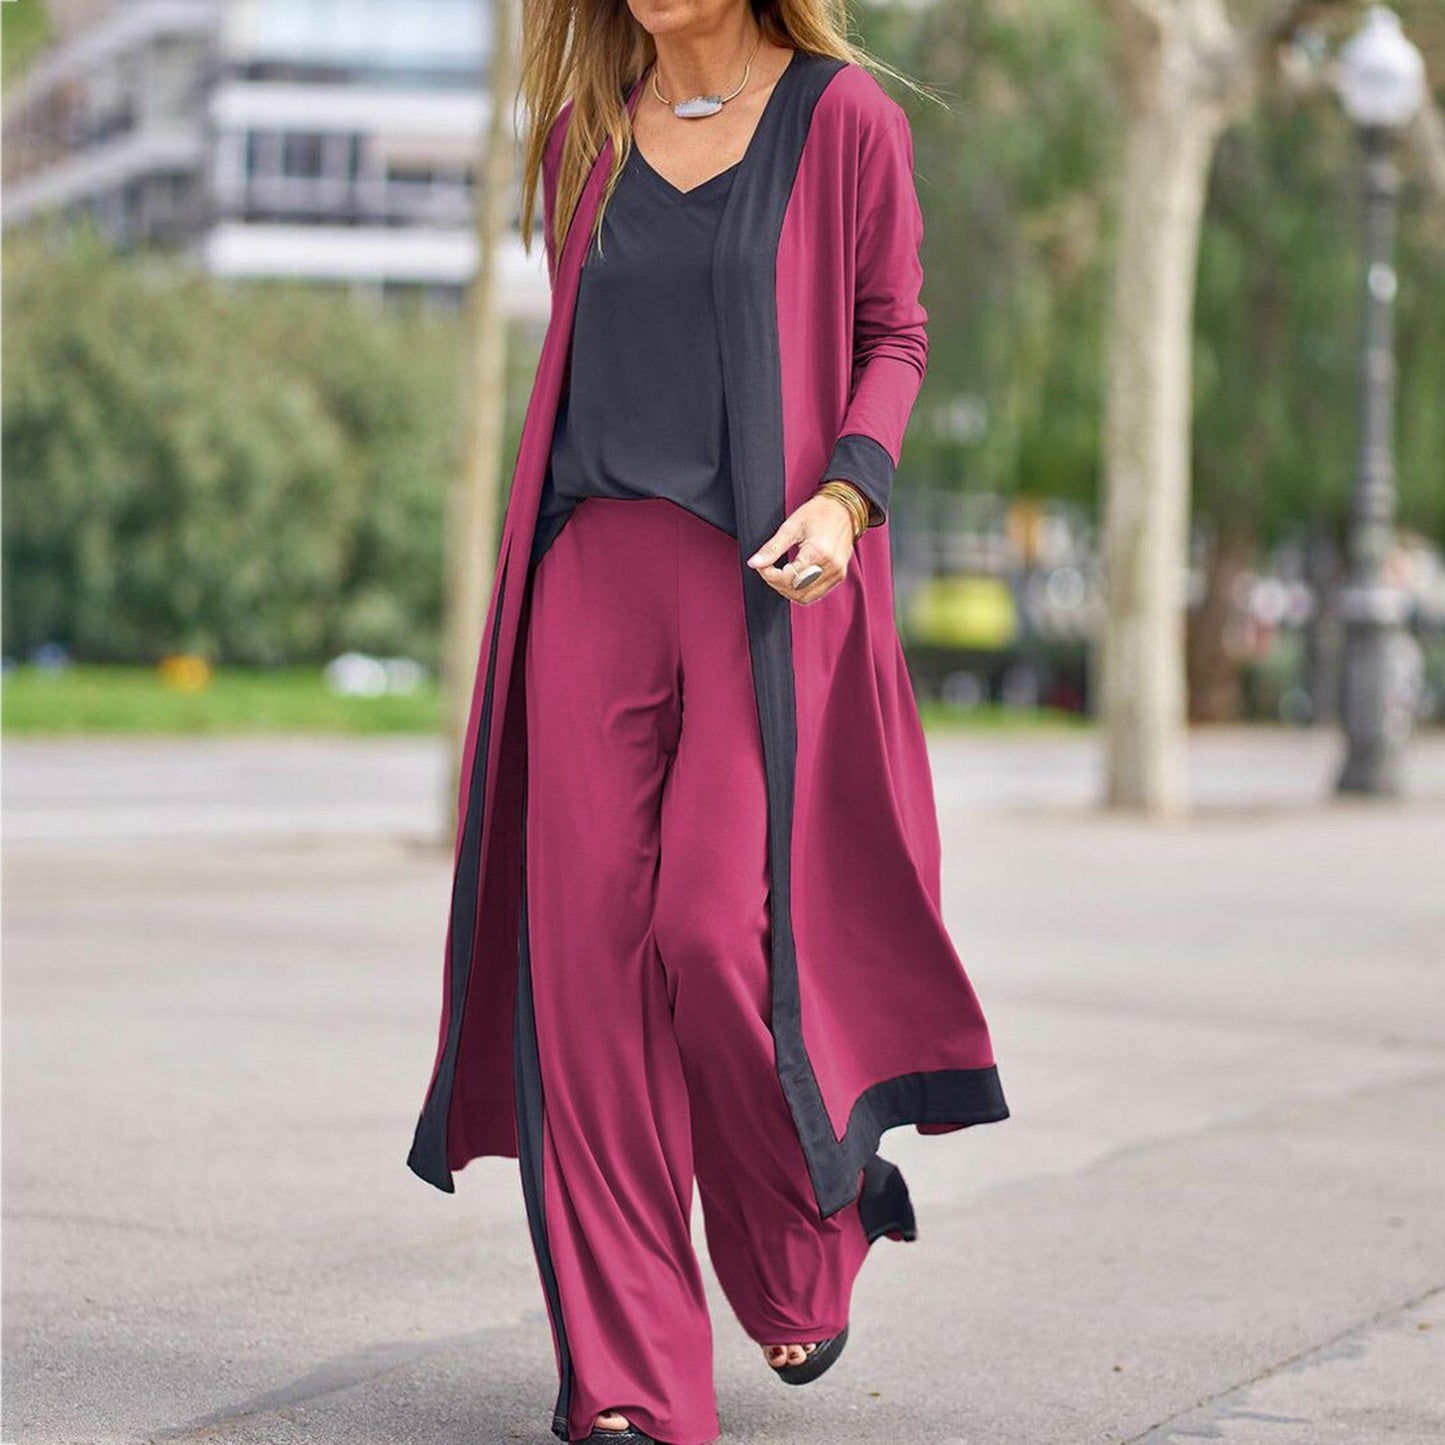 NTG Fad SUIT Red / S Splicing Contrasting Color Sleeveless Vest Long Sleeve Cardigan Jacket Trousers Three-piece SetSplicing Contrasting Color Sleeveless Vest Long Sleeve Cardigan Jacket Trousers Three-piece Set